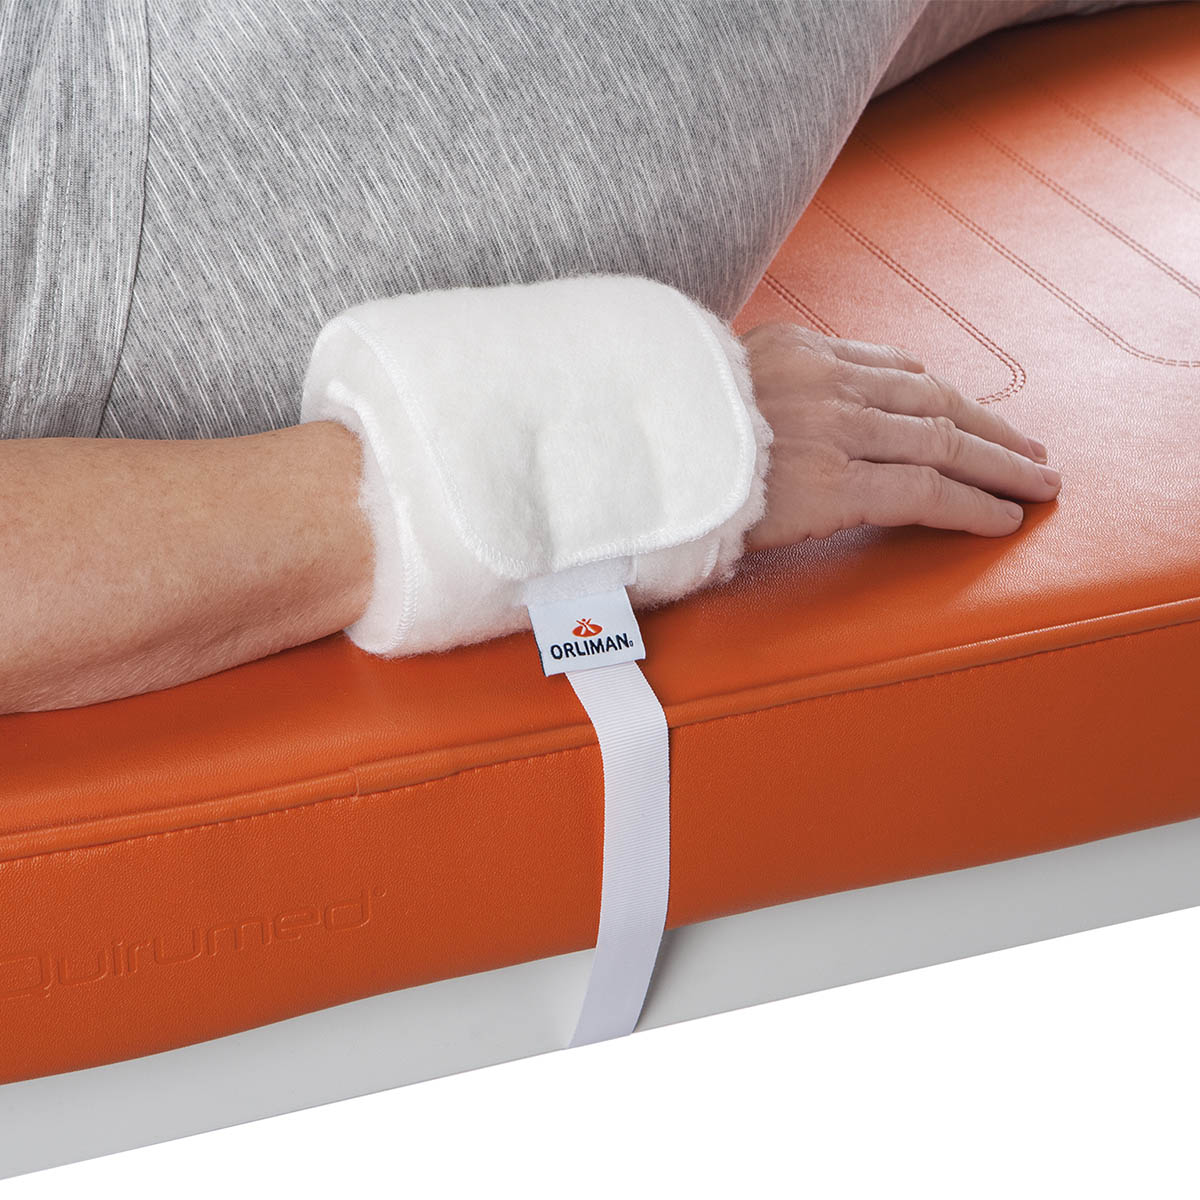 Wrist & Ankle Immobilization